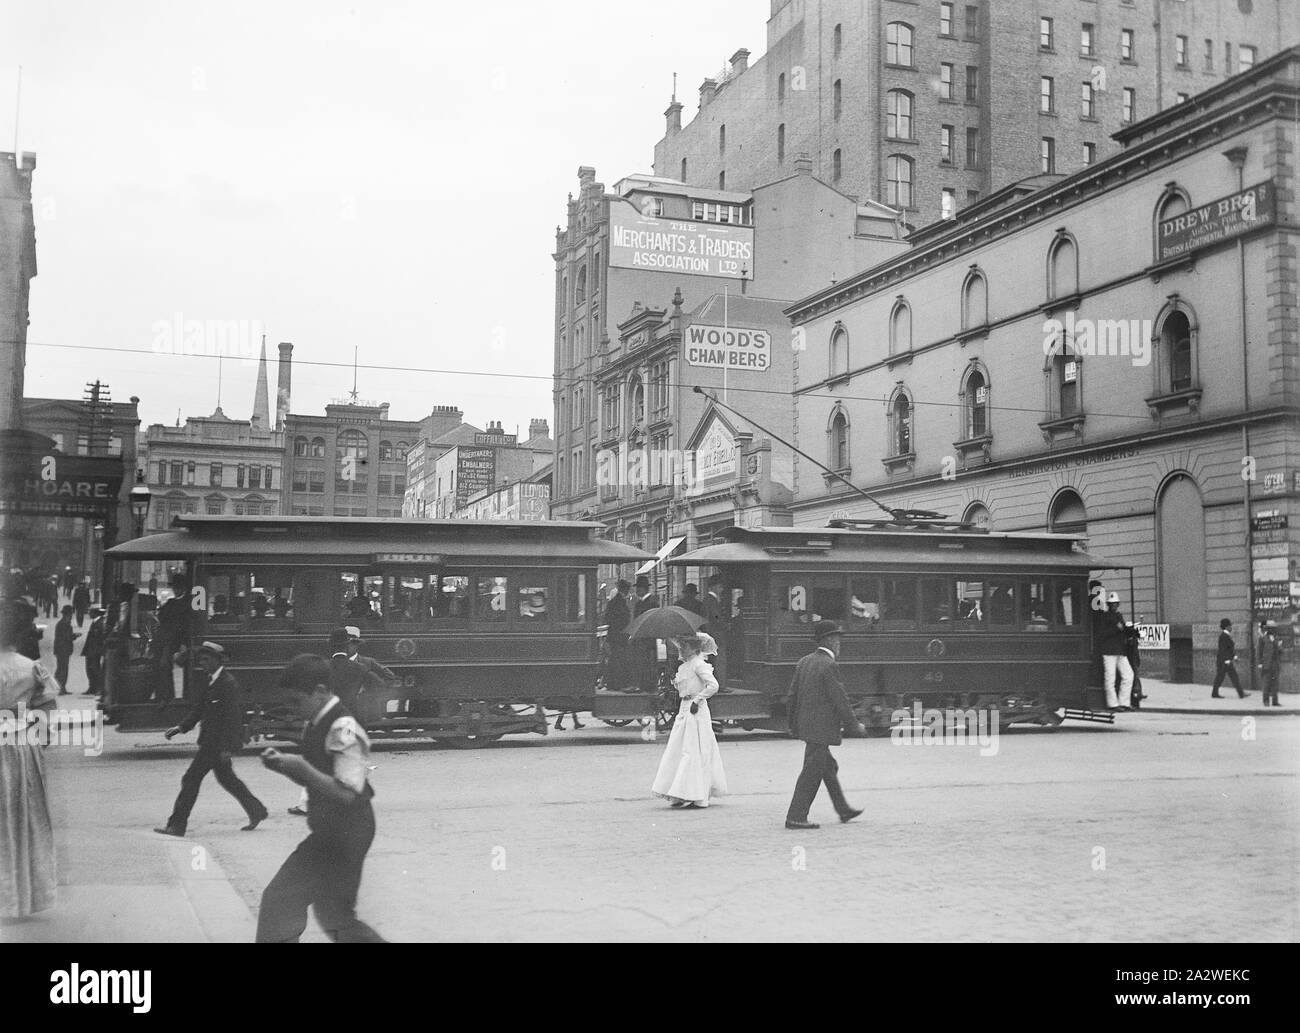 Glass Negative - City Tram, Sydney, circa 1900s, Black and white 1/4 plate glass negative featuring a tram on a busy street in Sydney city, circa 1900s. This is one of twelve negatives originally housed in an Imperial Special Rapid Plates box featuring scenes in Sydney and a picnic at an unknown location, presumably in New South Wales or Victoria. The provenance of these images is unclear, but they were housed in the Kodak Museum in a box Stock Photo